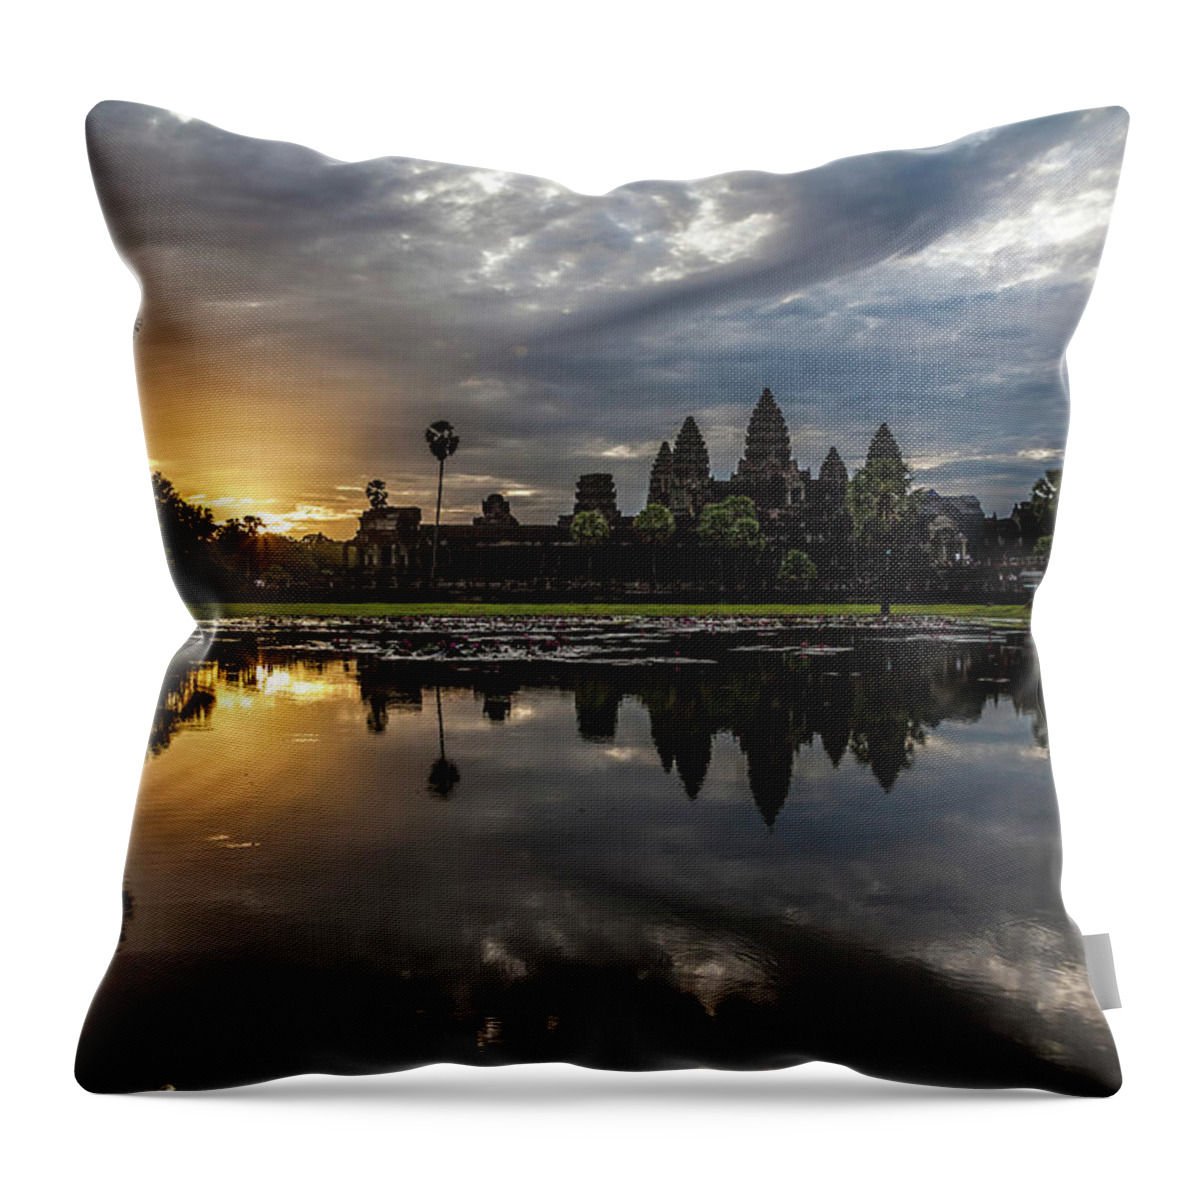 Tranquility Throw Pillow featuring the photograph Angkor Wat Sunrise by Www.sergiodiaz.net